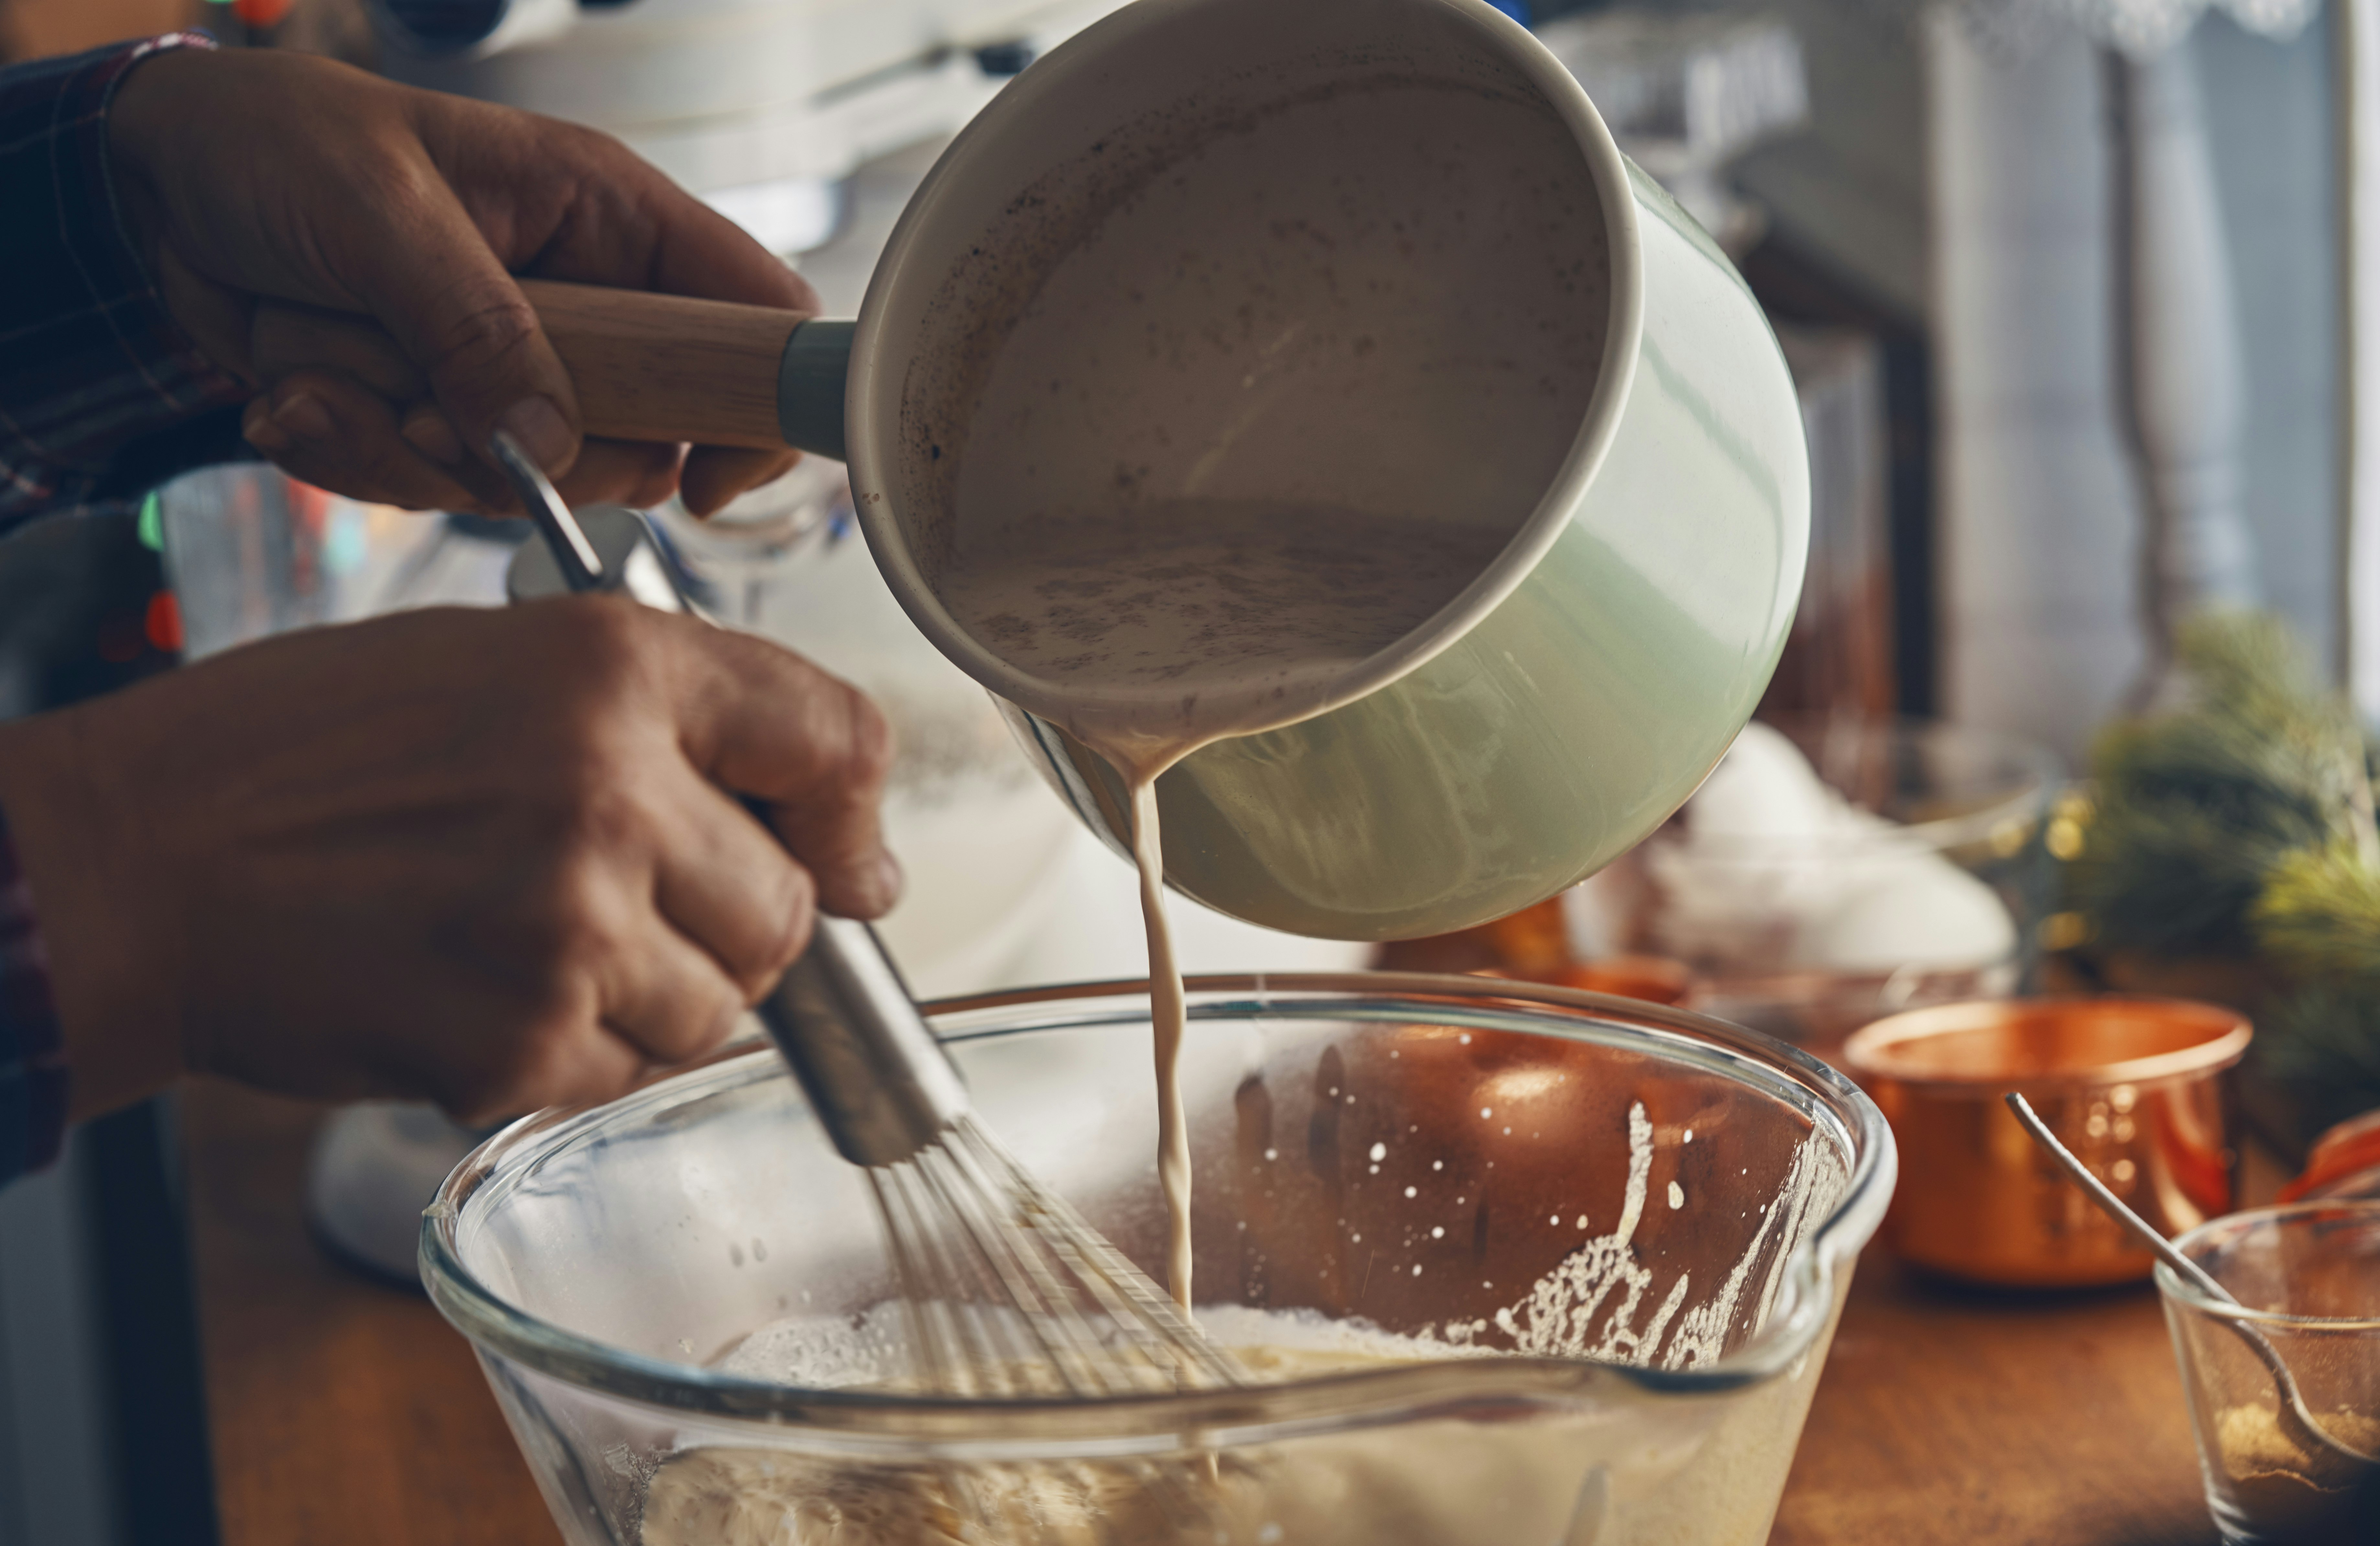 A person pours a creamy mixture into a glass bowl while whisking 